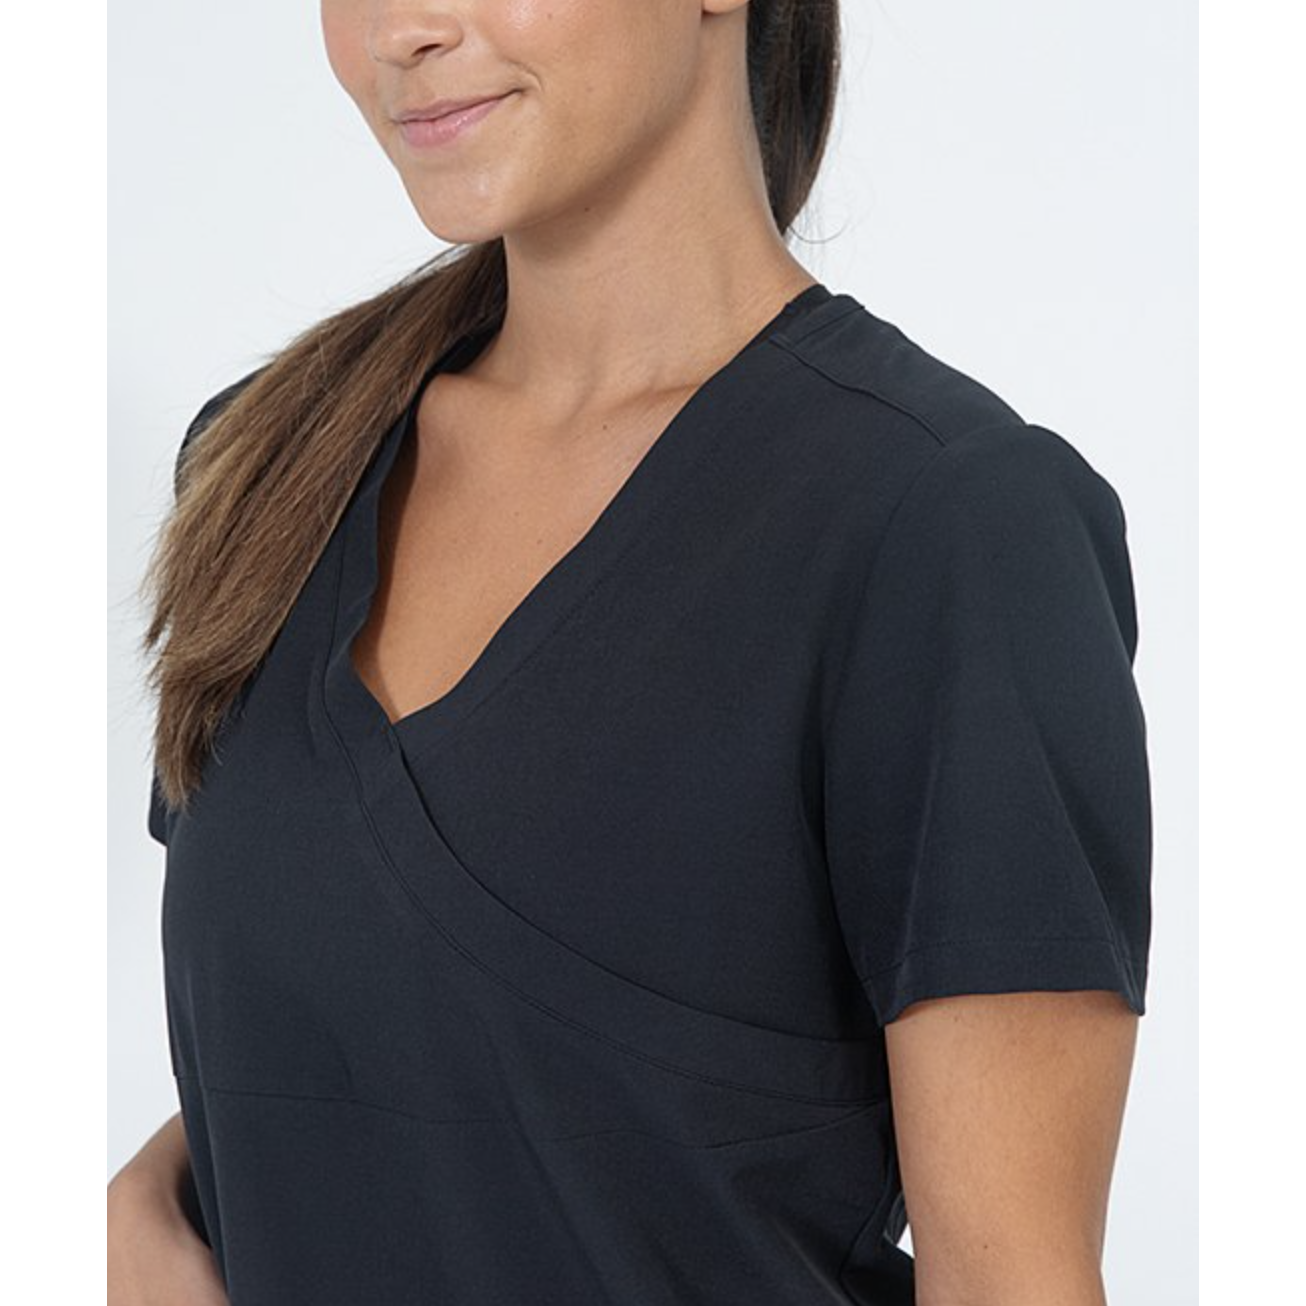 BUY ANY 3 KALEA AND GET 1 FREE KALEA DEAL* Scrub Top Women's Water Resistant & Four Way Stretch Reverie T1 SALE